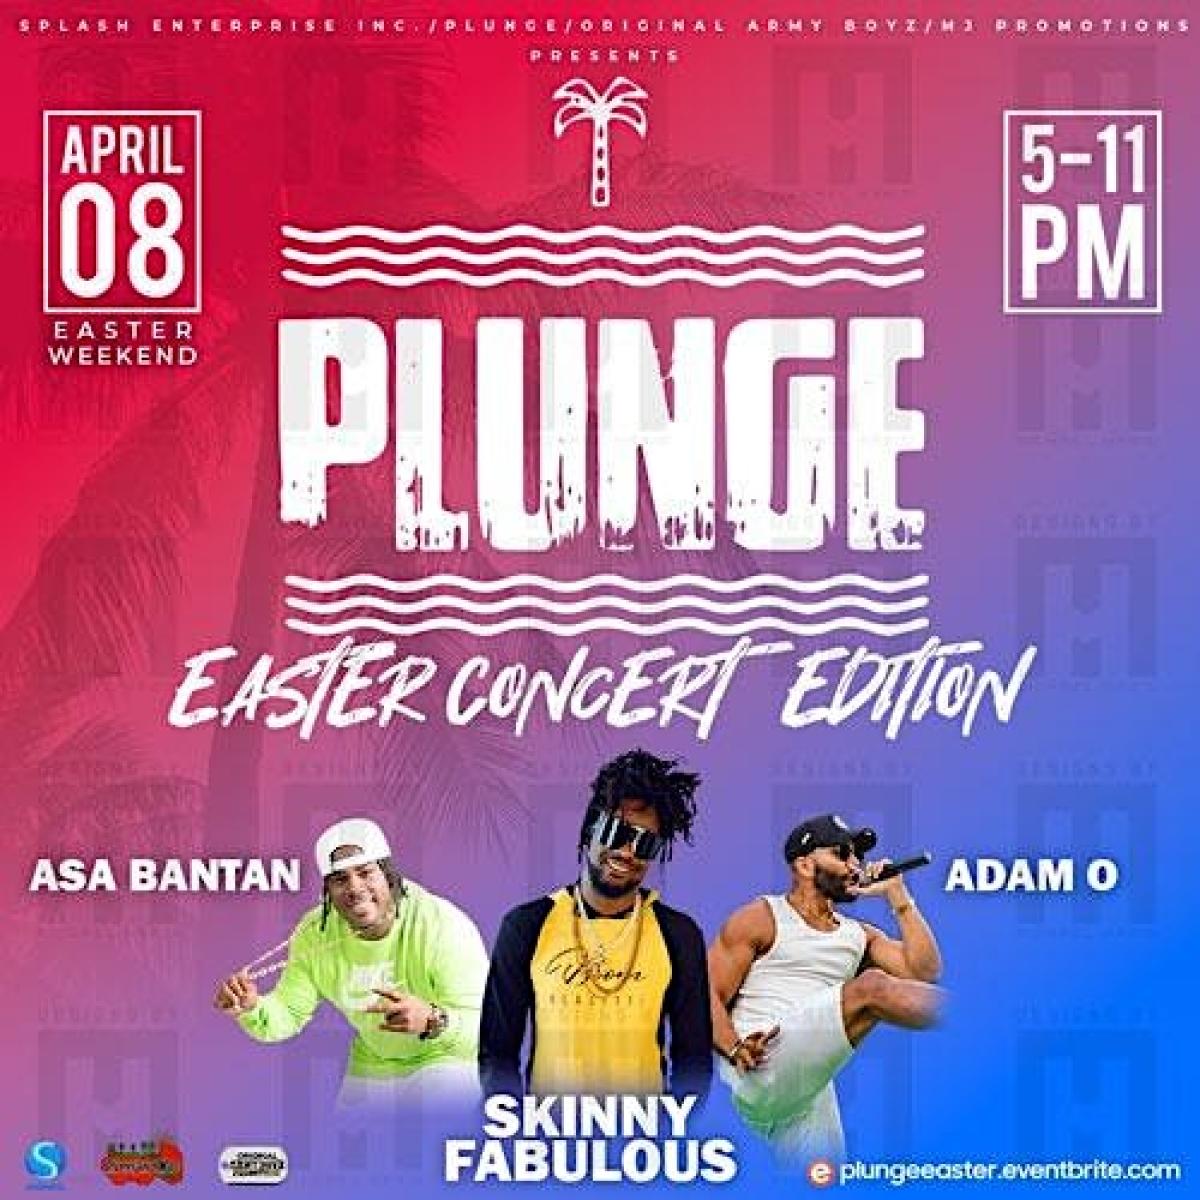 Plunge Easter Concert Edition flyer or graphic.